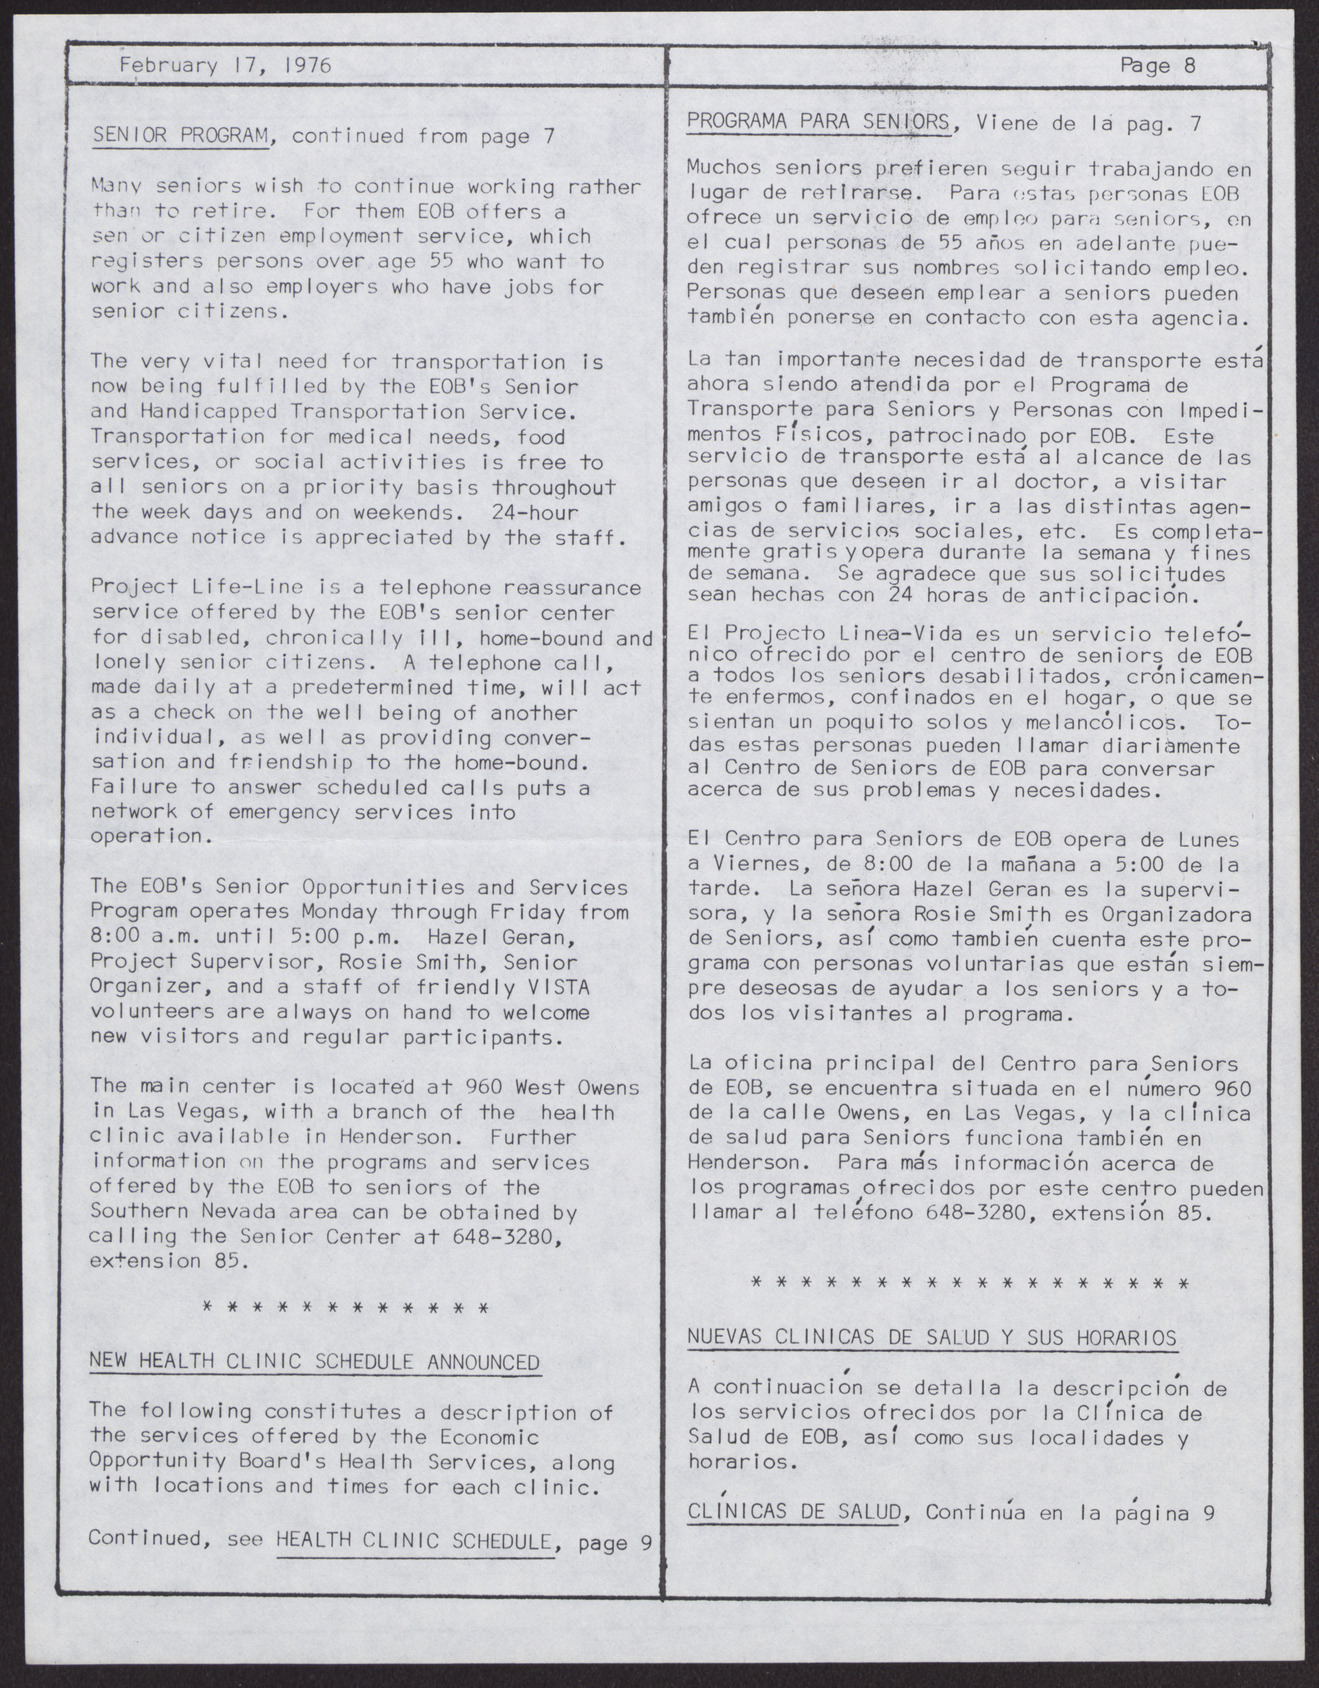 EOB Bulletin newsletter (12 pages), February 17, 1976, page 8